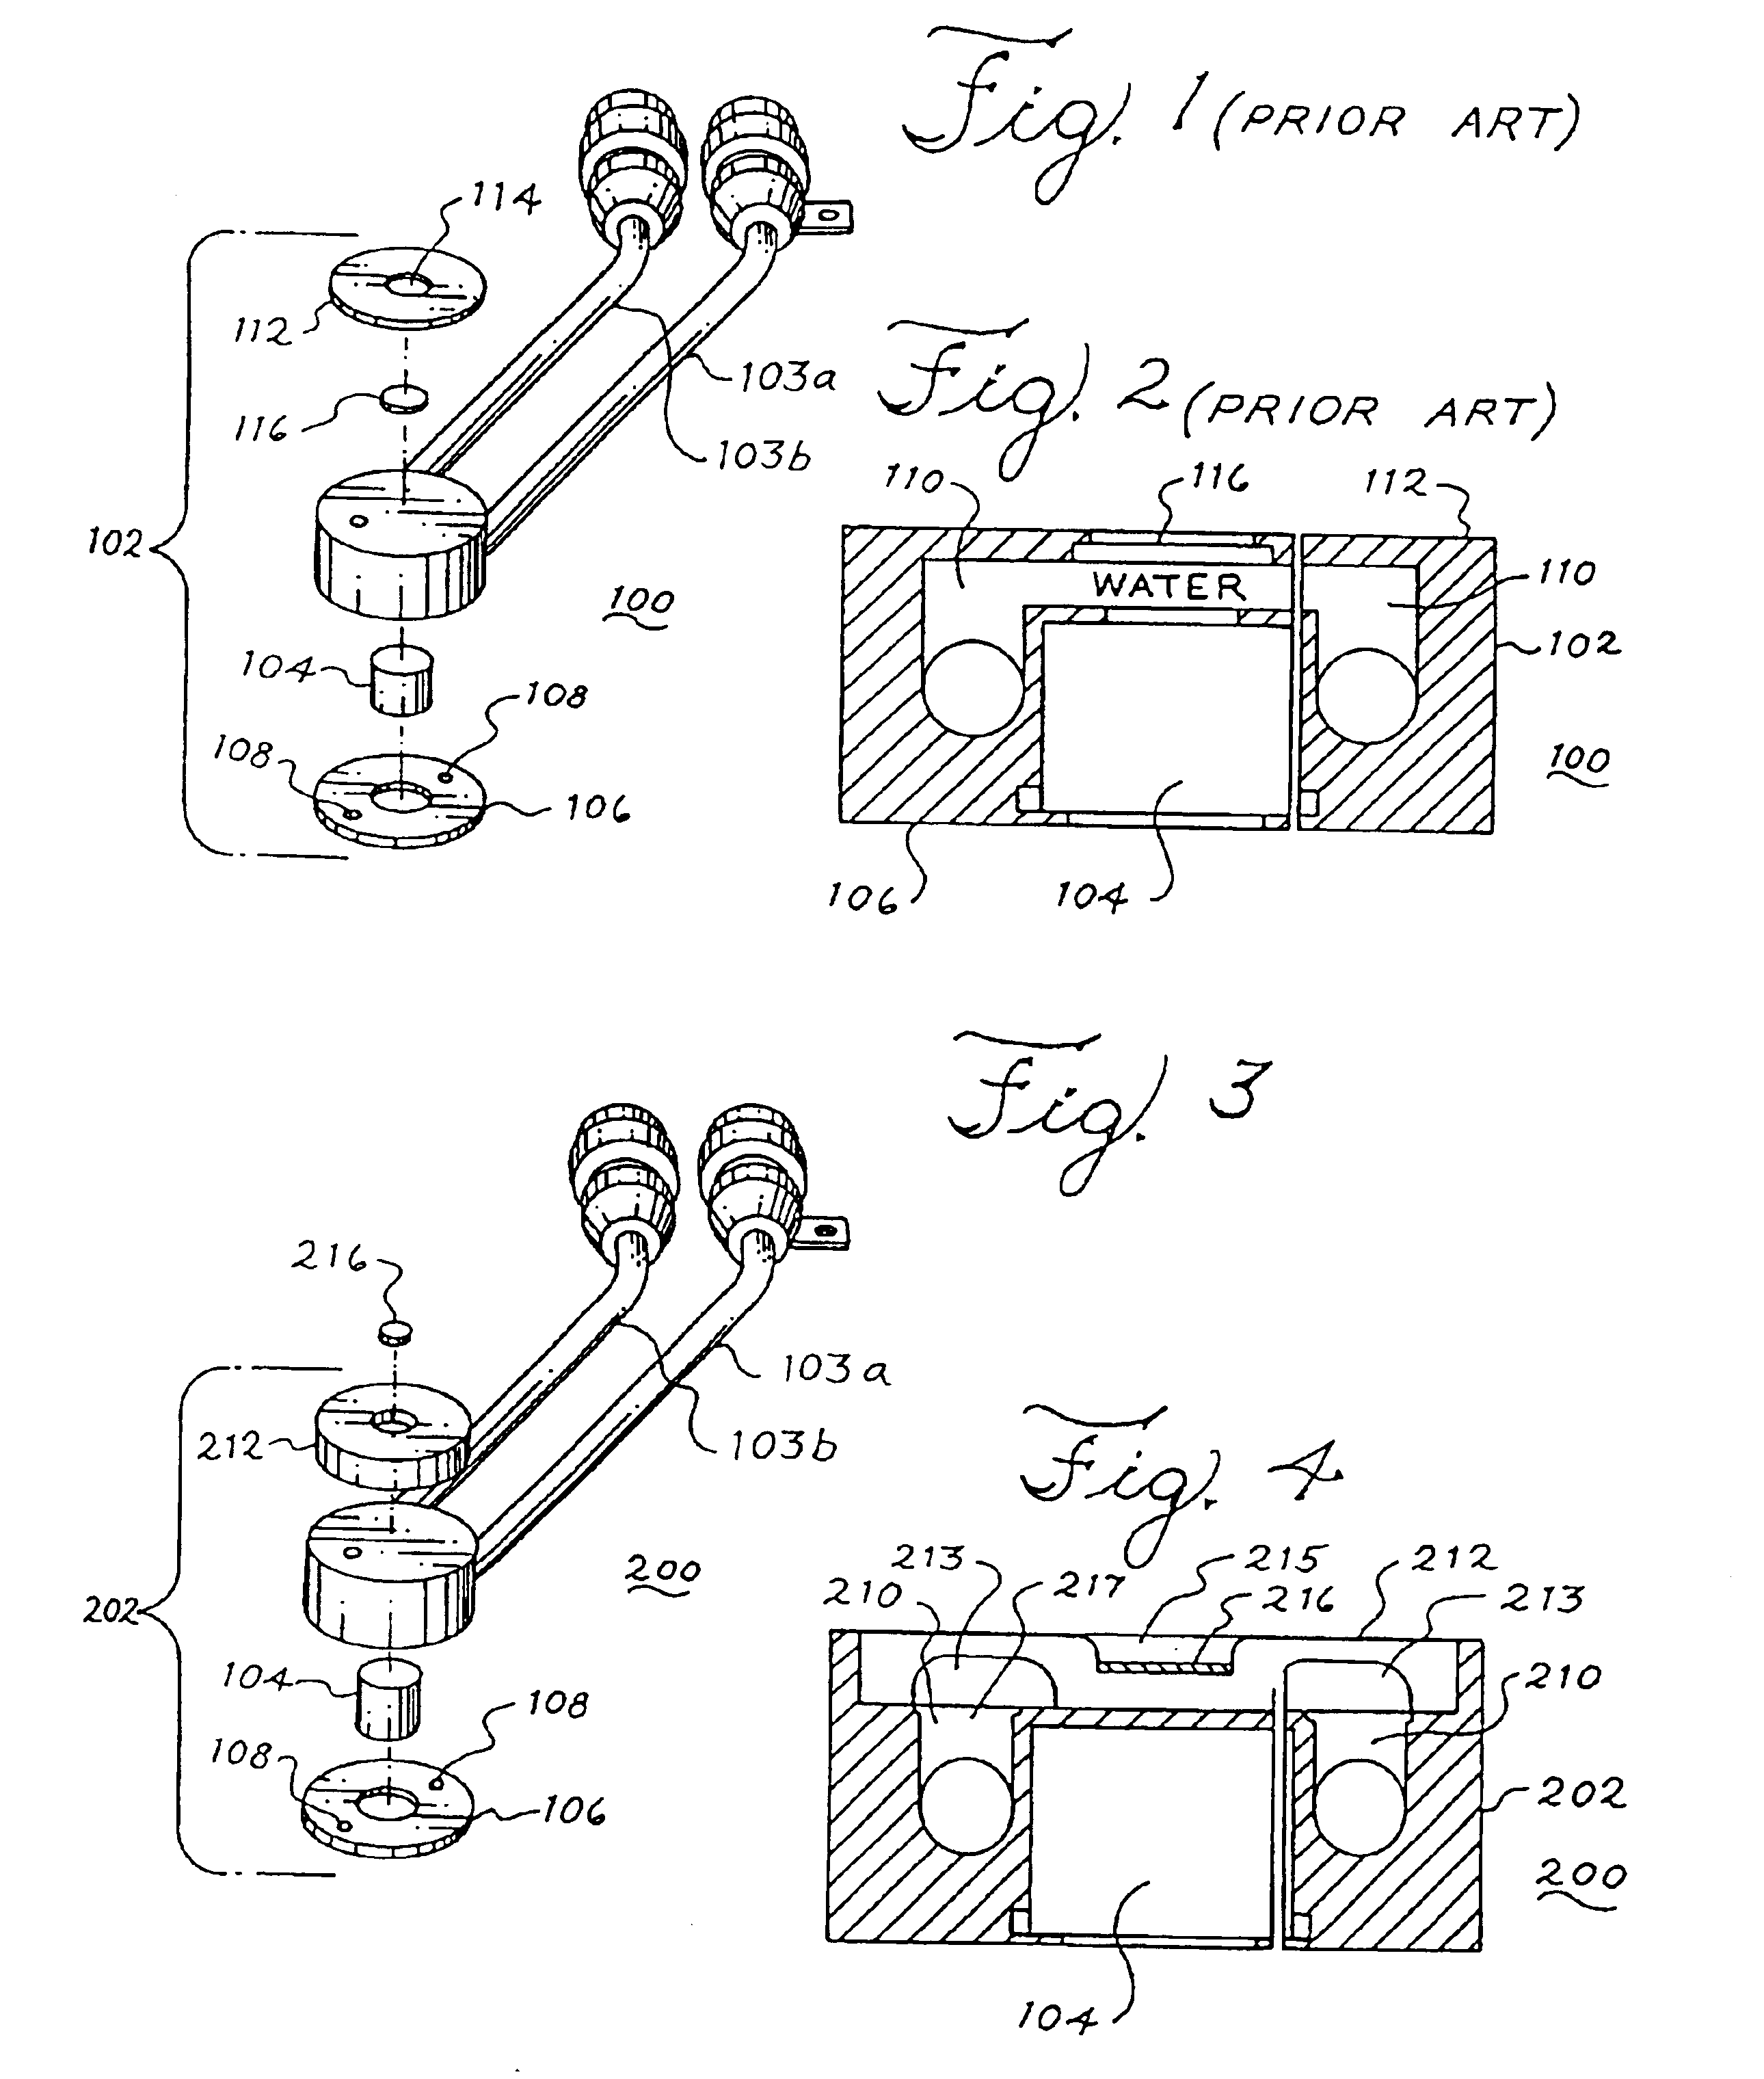 Tungsten composite x-ray target assembly for radiation therapy